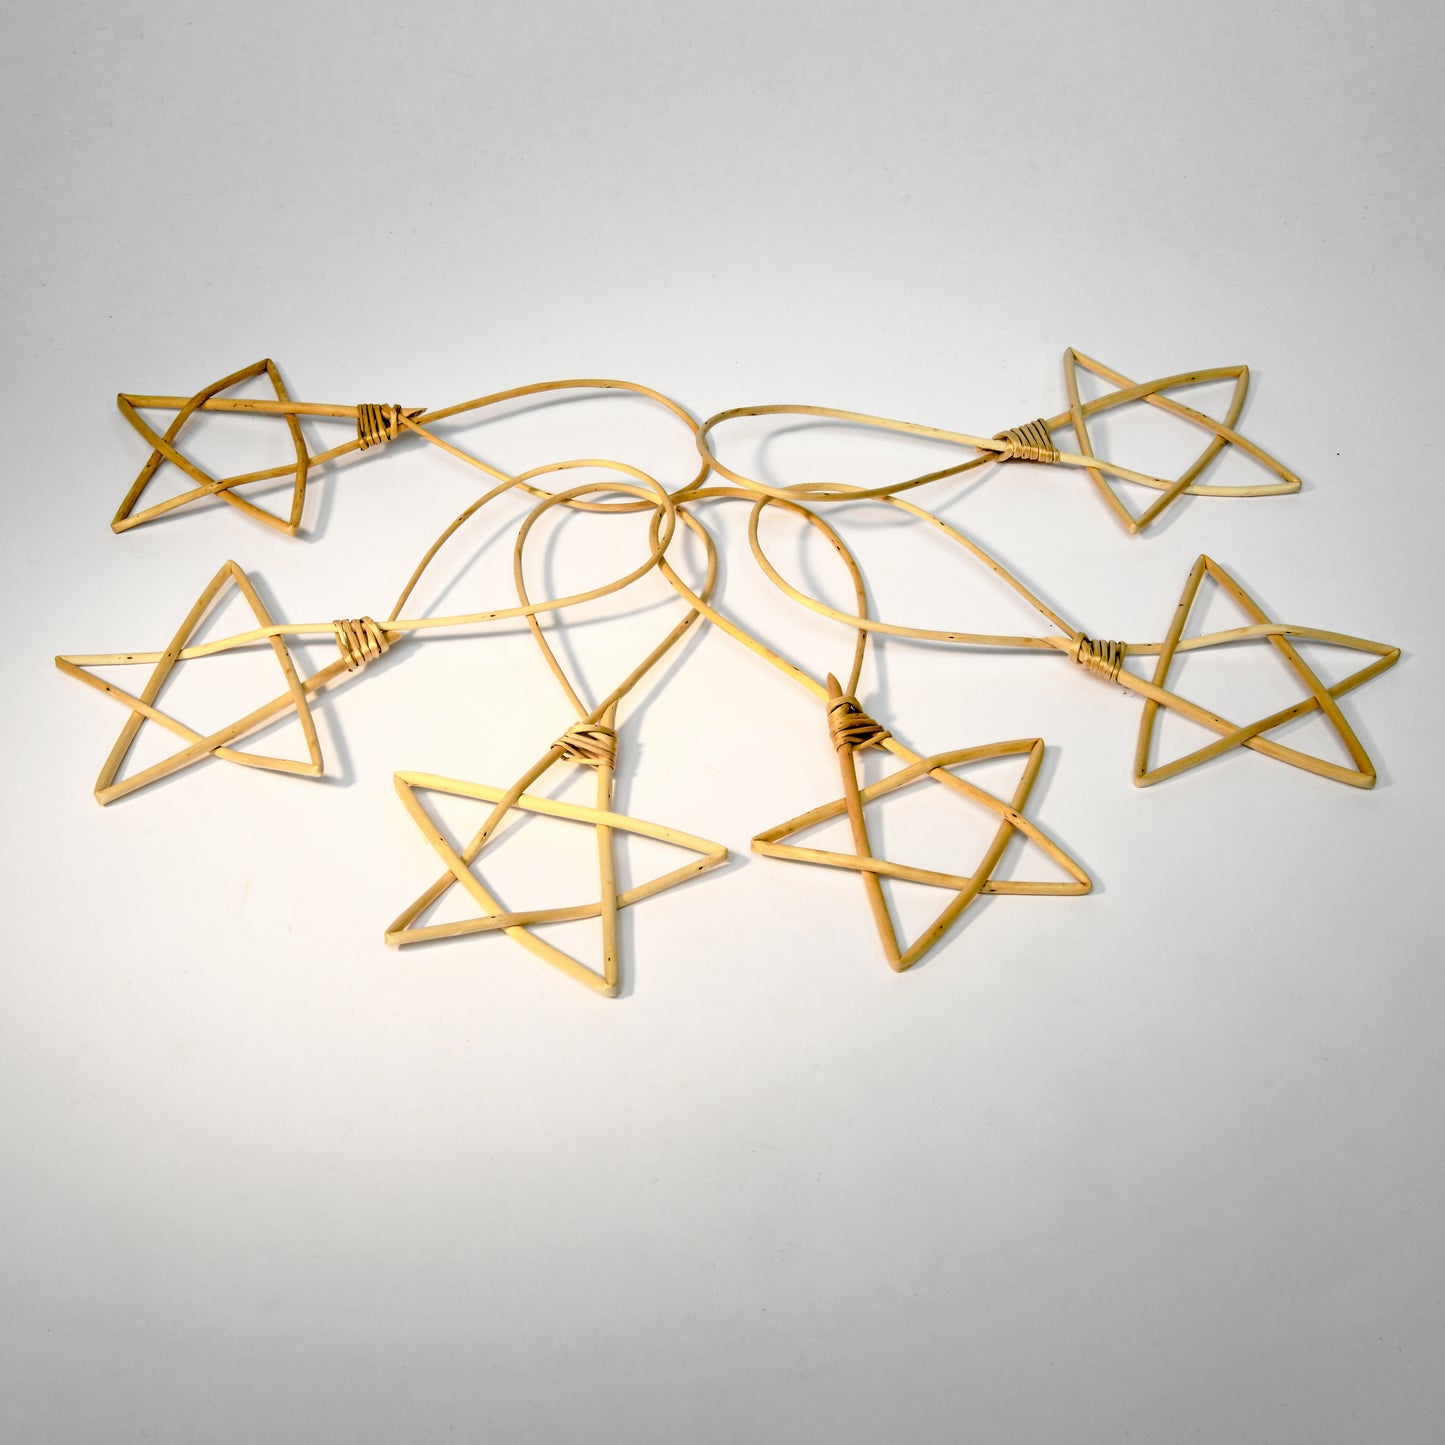 A simple willow star decoration to add joy.